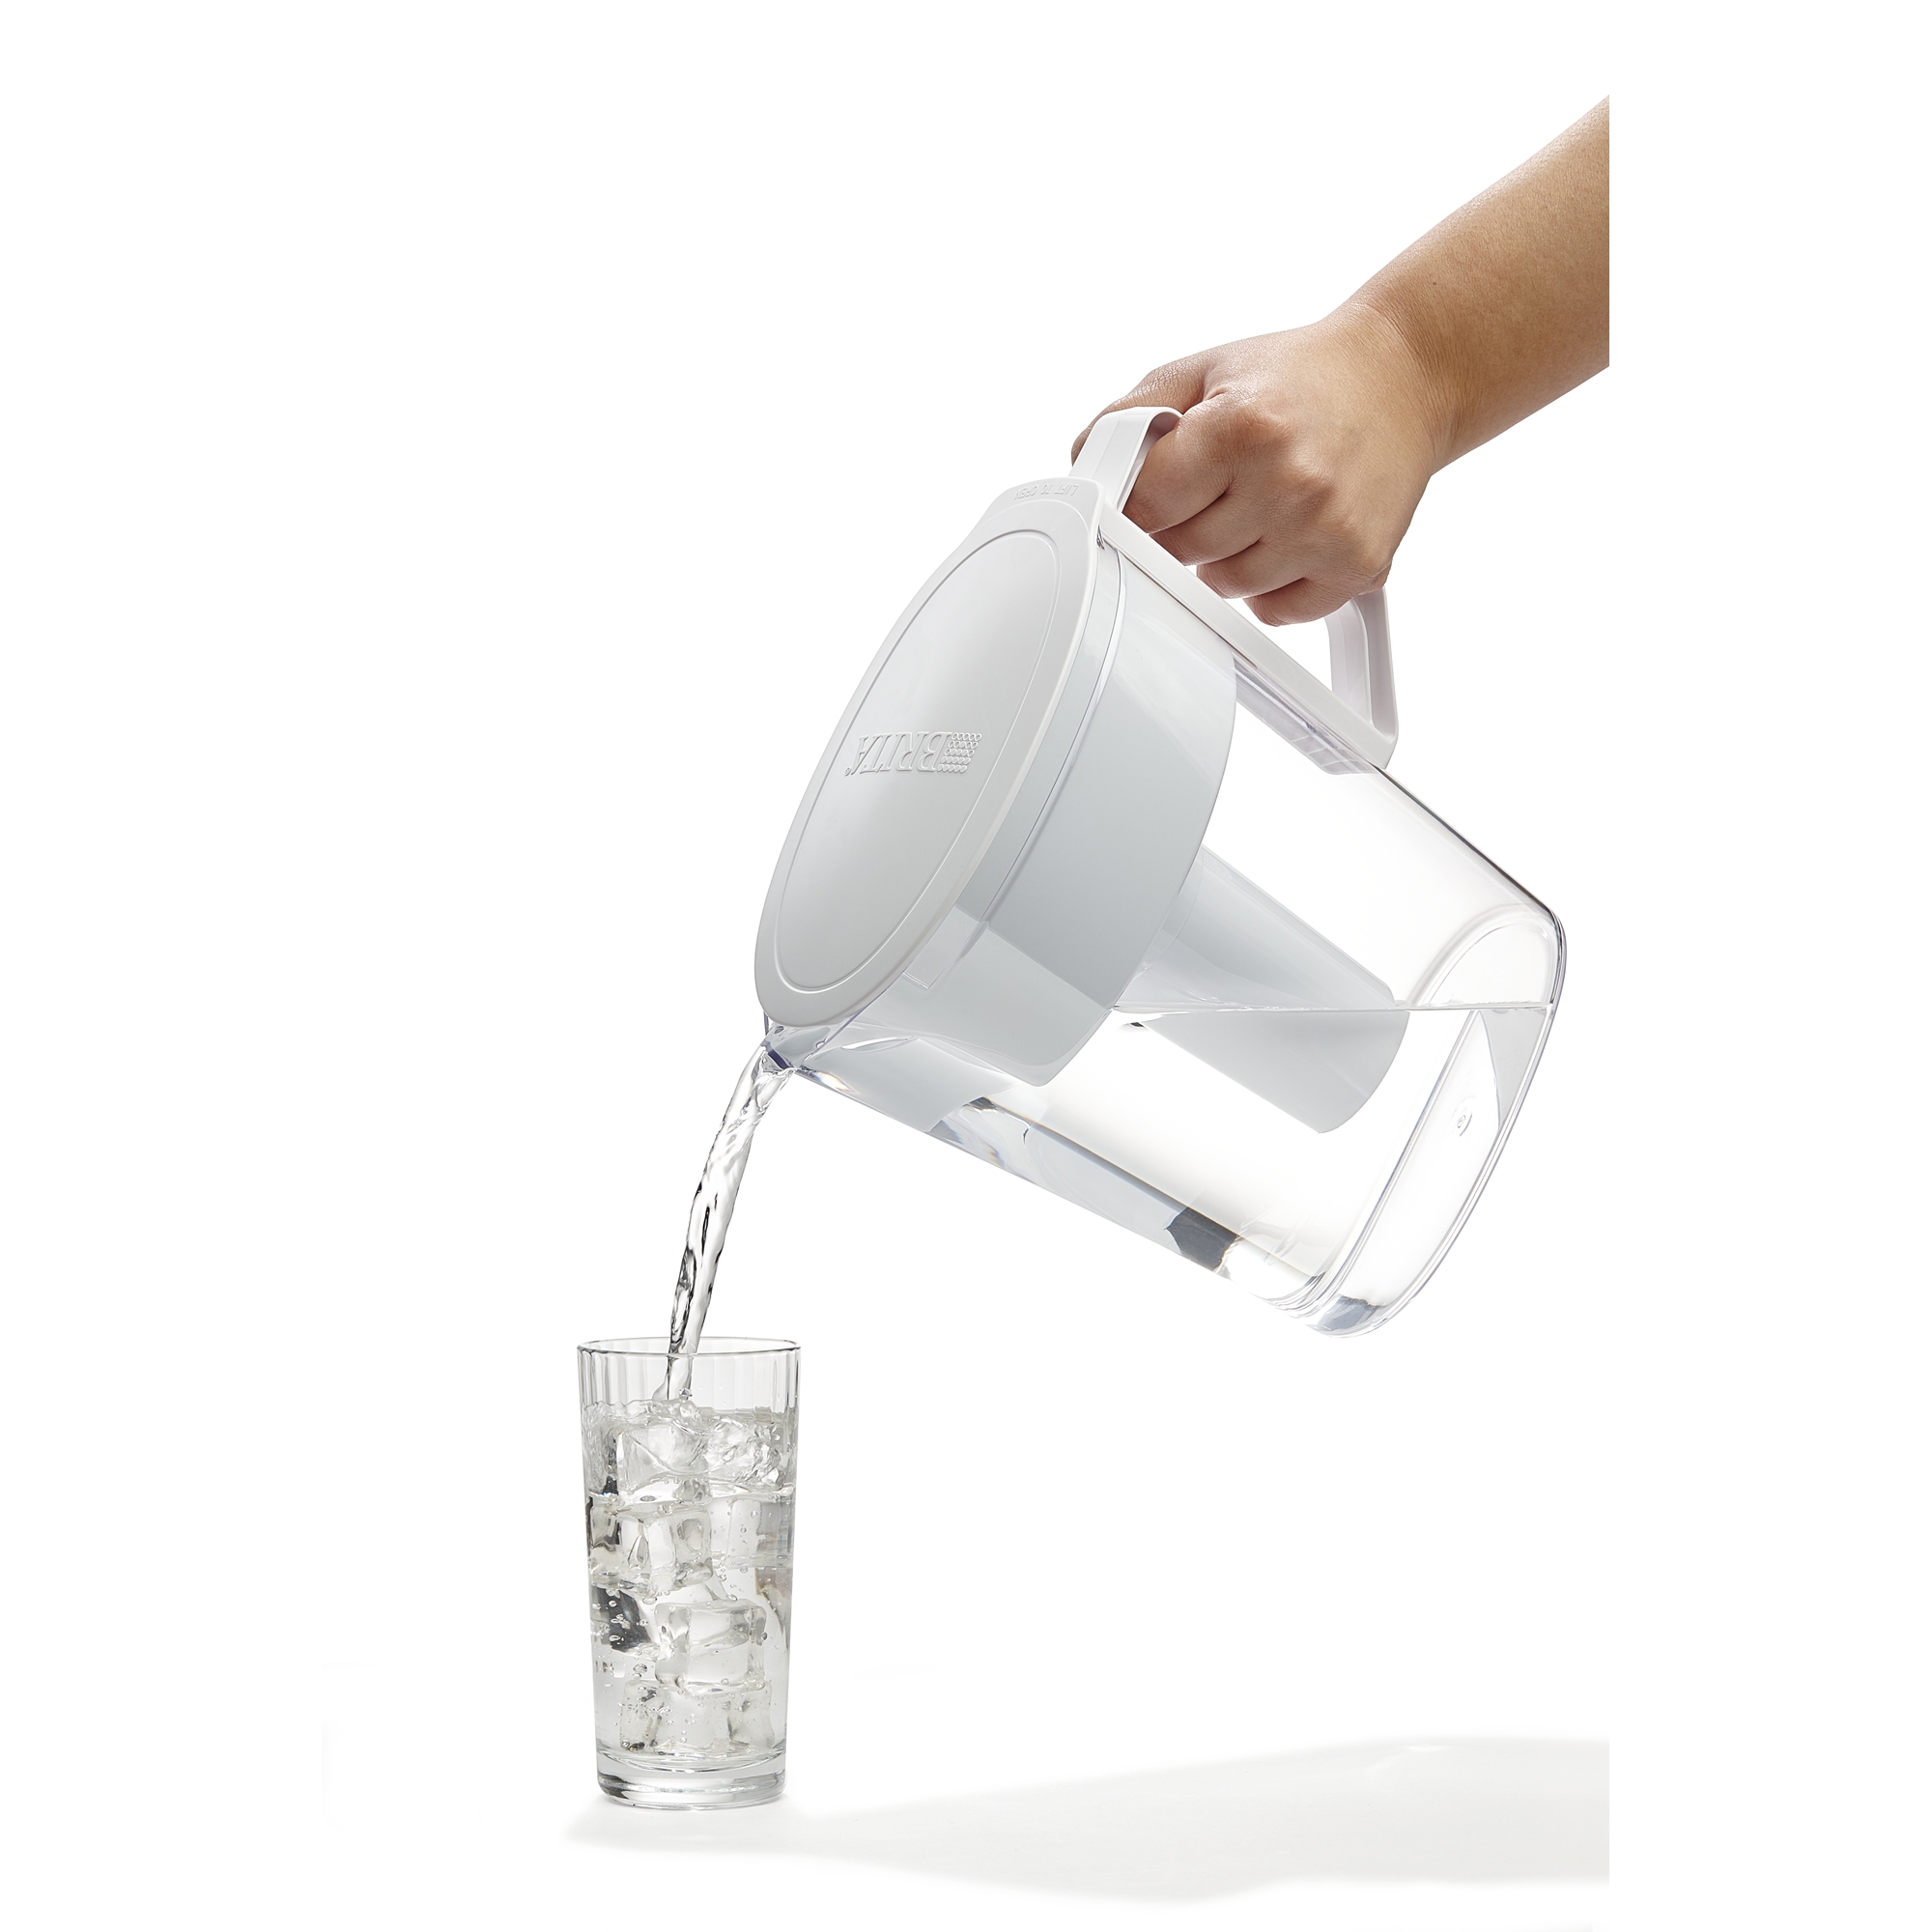 Brita Slim Water Pitcher with 1 Filter, BPA Free, White, 5 Cup - image 2 of 5